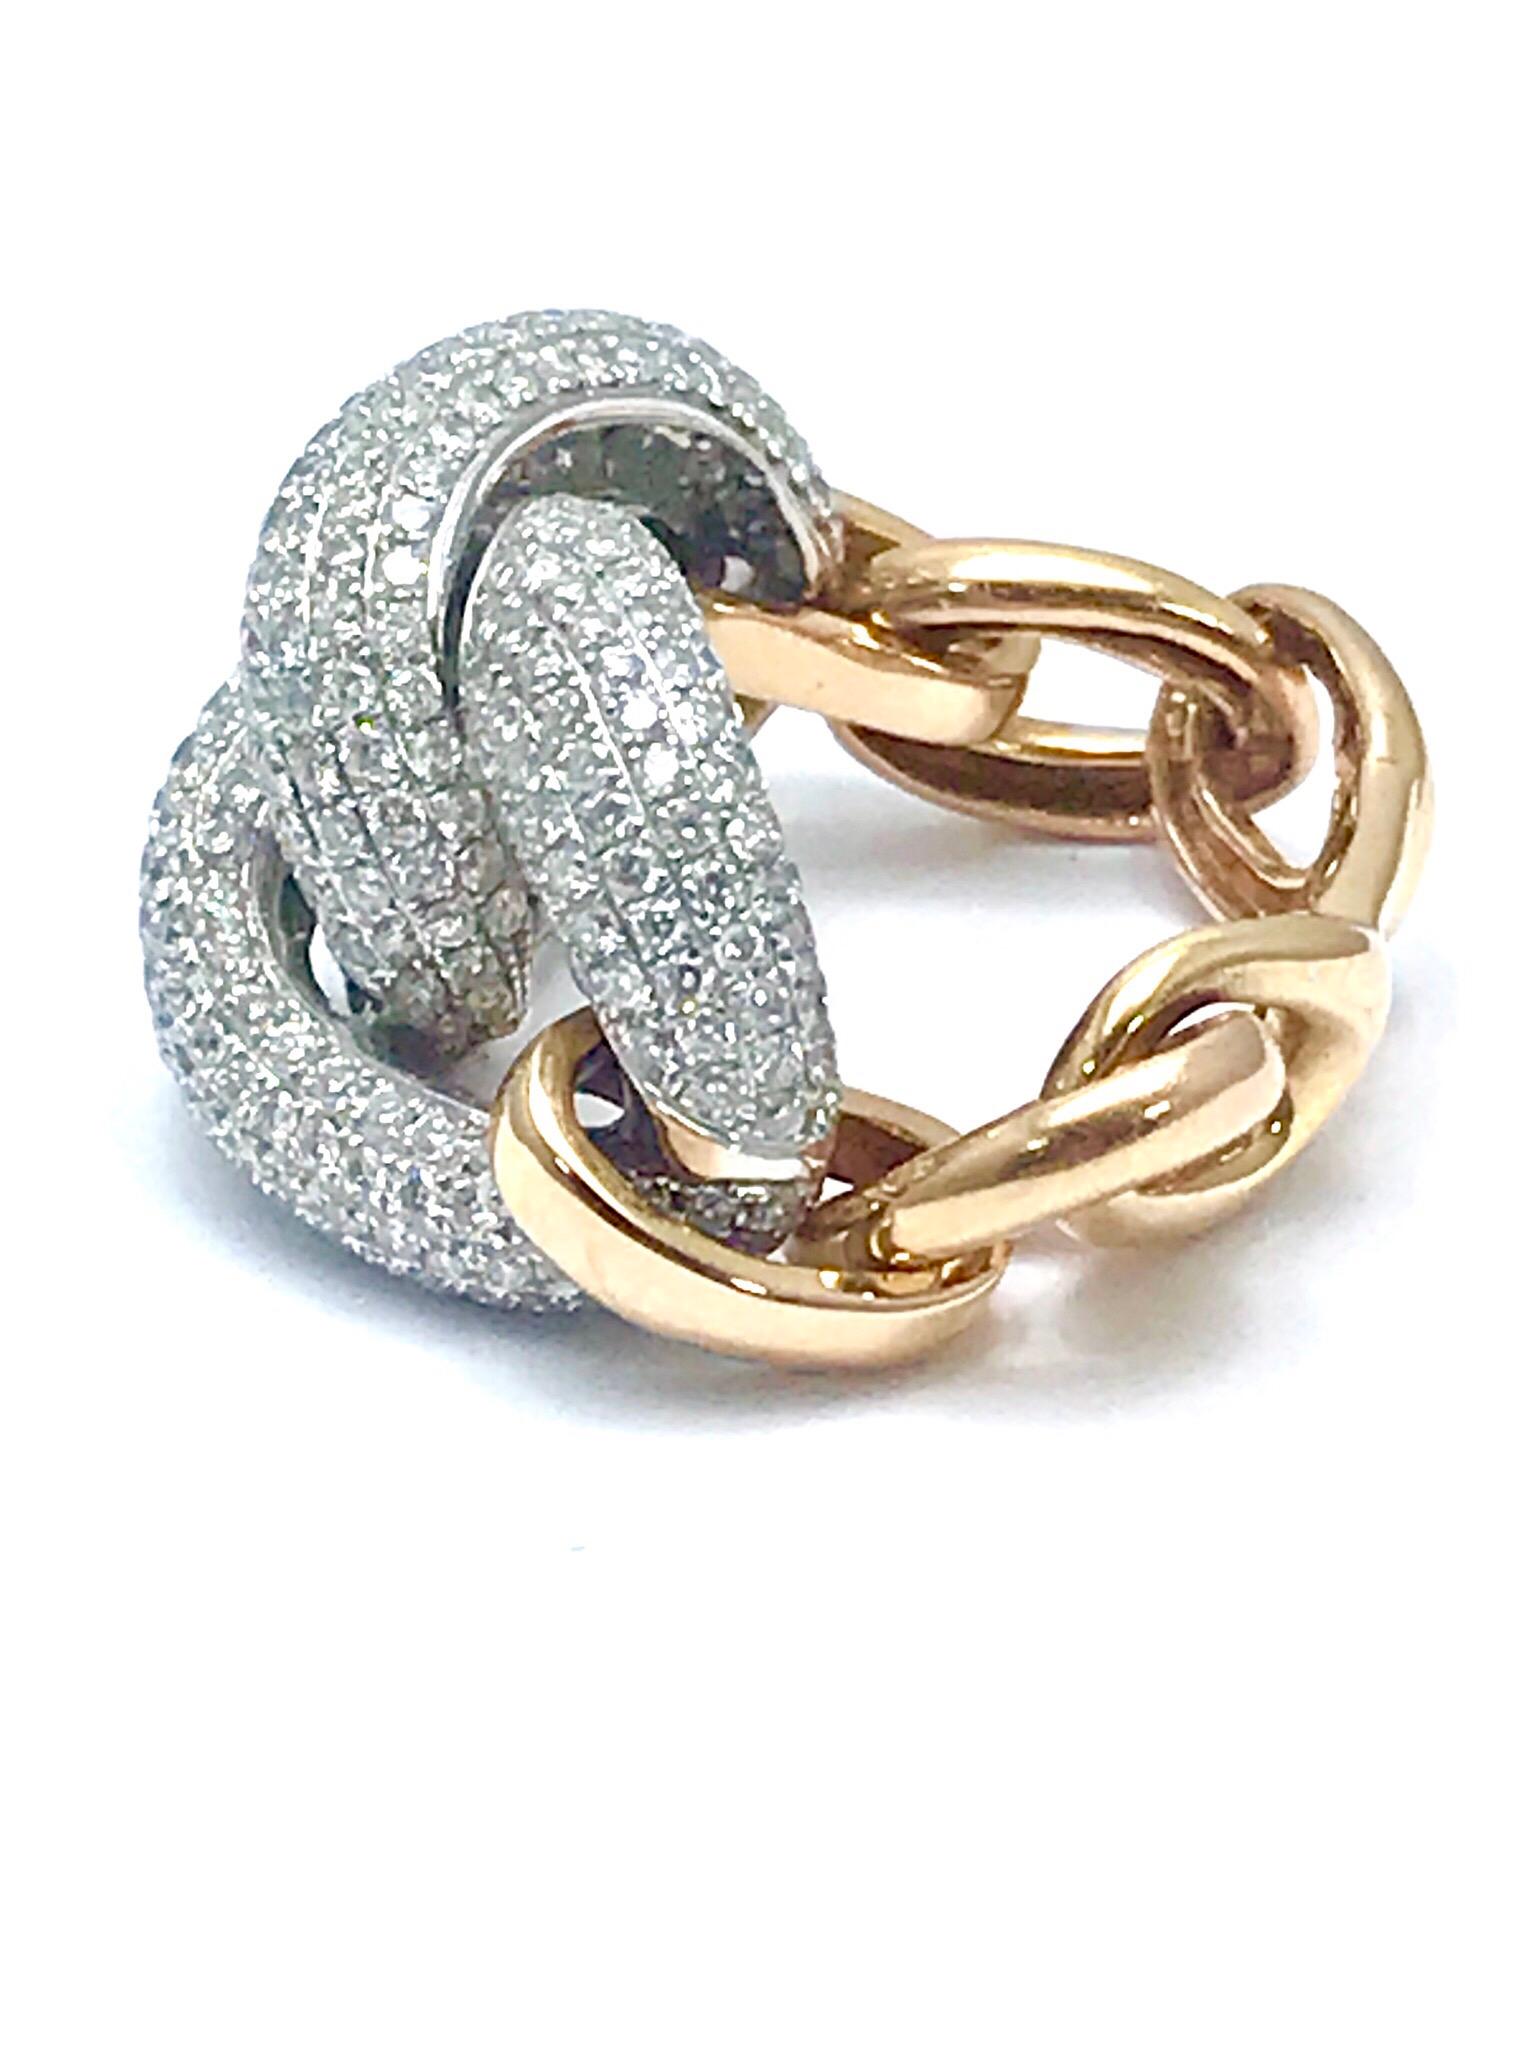 This is a gorgeous fashion ring.  The ring contains 2.35 carats in round brilliant pave Diamonds, set in interlocking links in 18 karat white gold, with 18 karat rose gold flexible links for the shank.  The Diamonds in the ring are graded as G-H